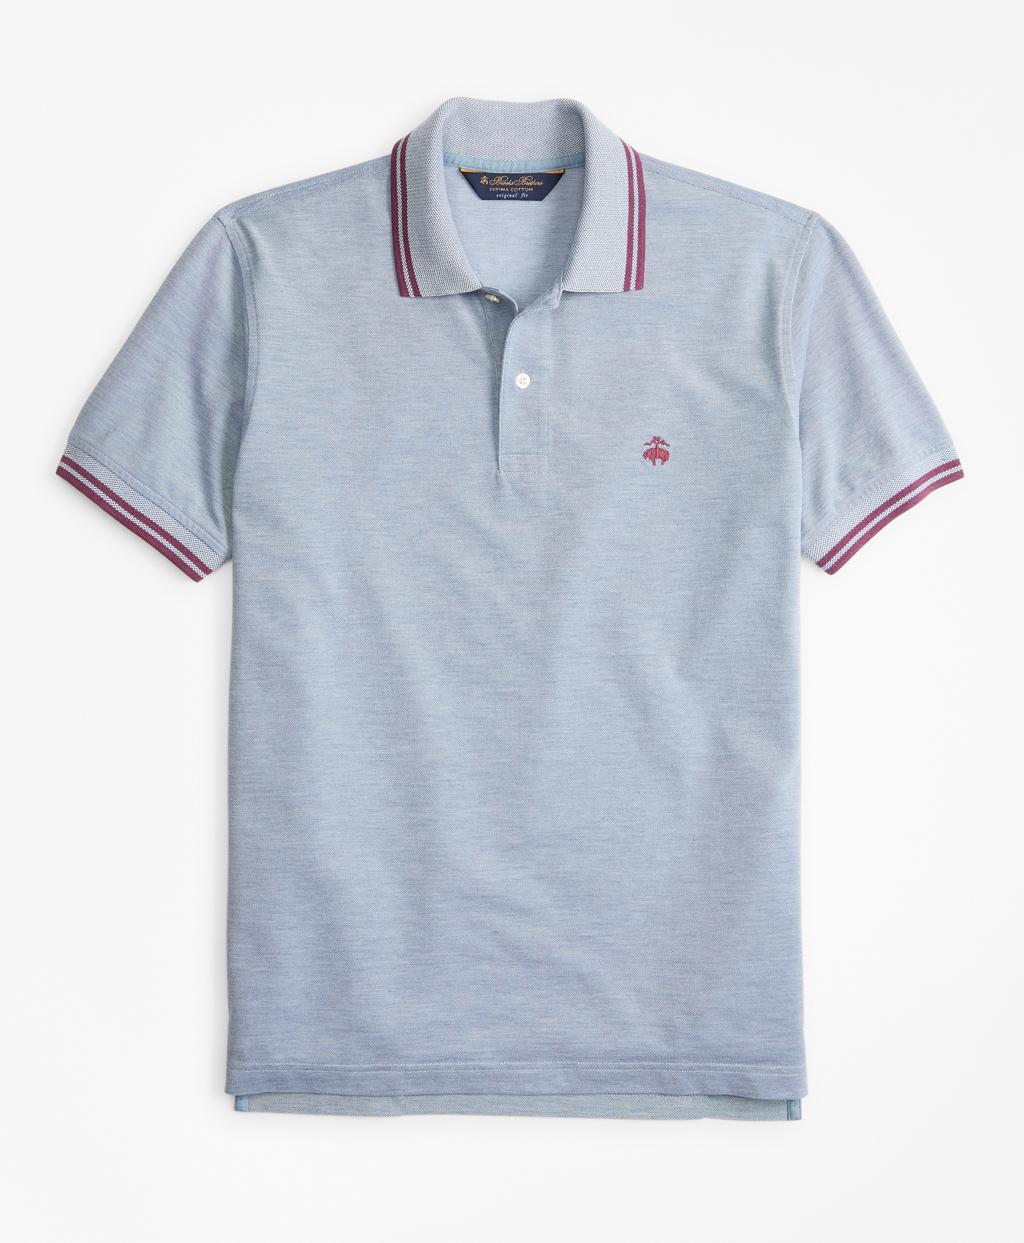 Brooks Brothers Original Fit Vintage Tennis Polo in Blue for Men - Lyst